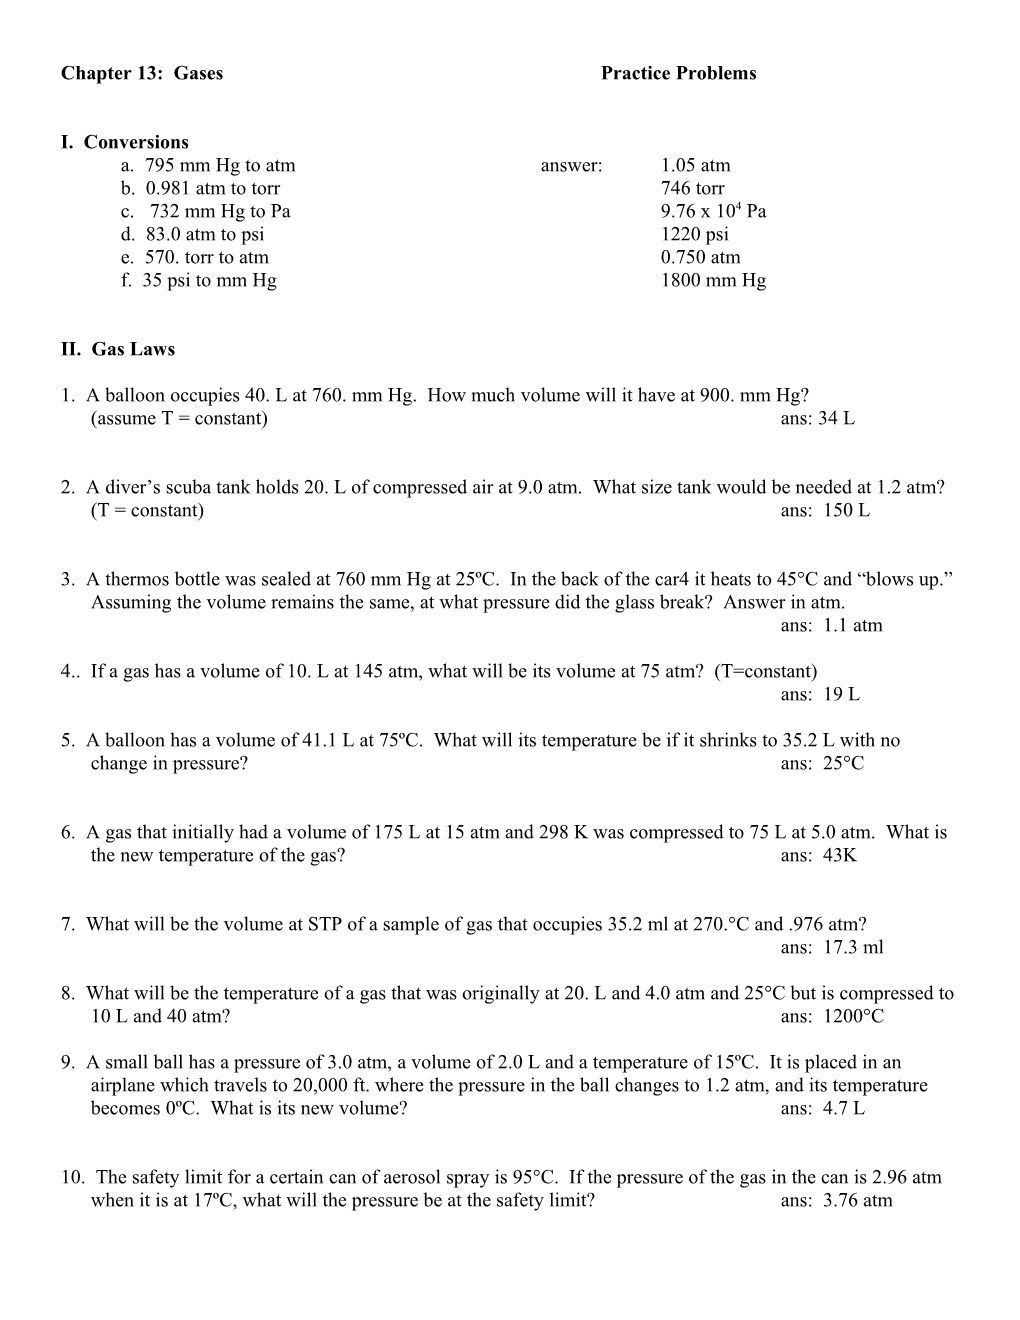 Gas Laws: Practice Problems